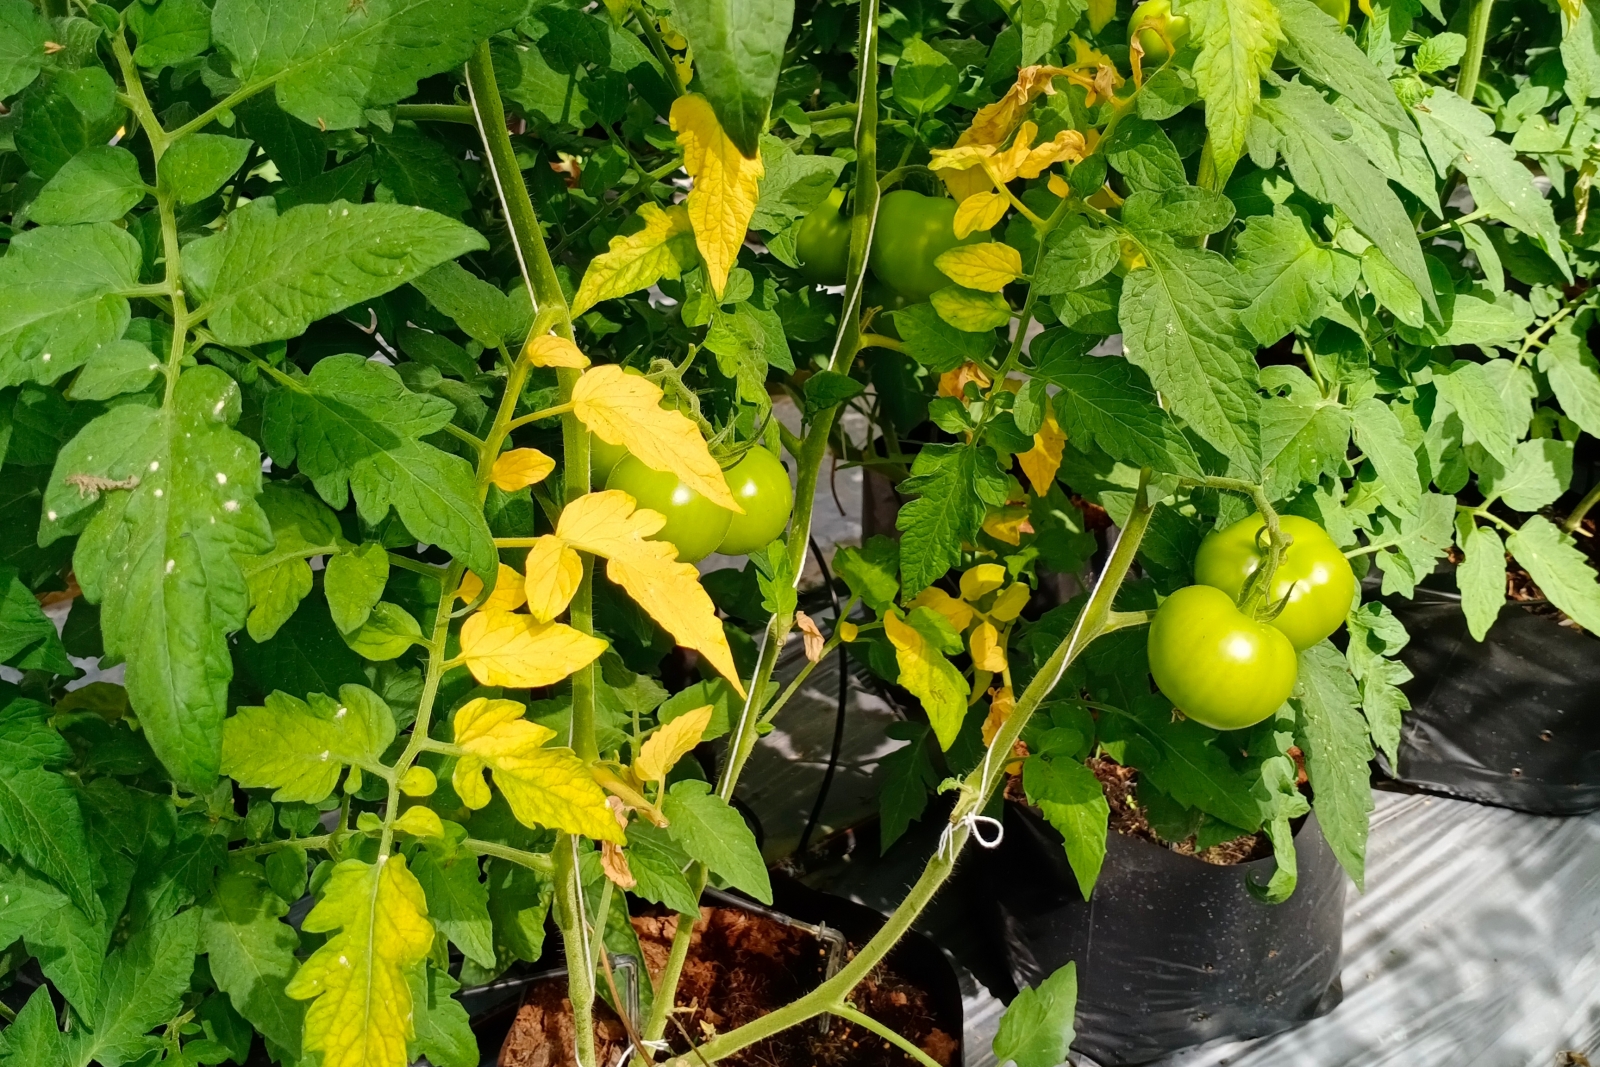 Fusarium wilt of tomatoes. Tomato plants with yellowing leaves.